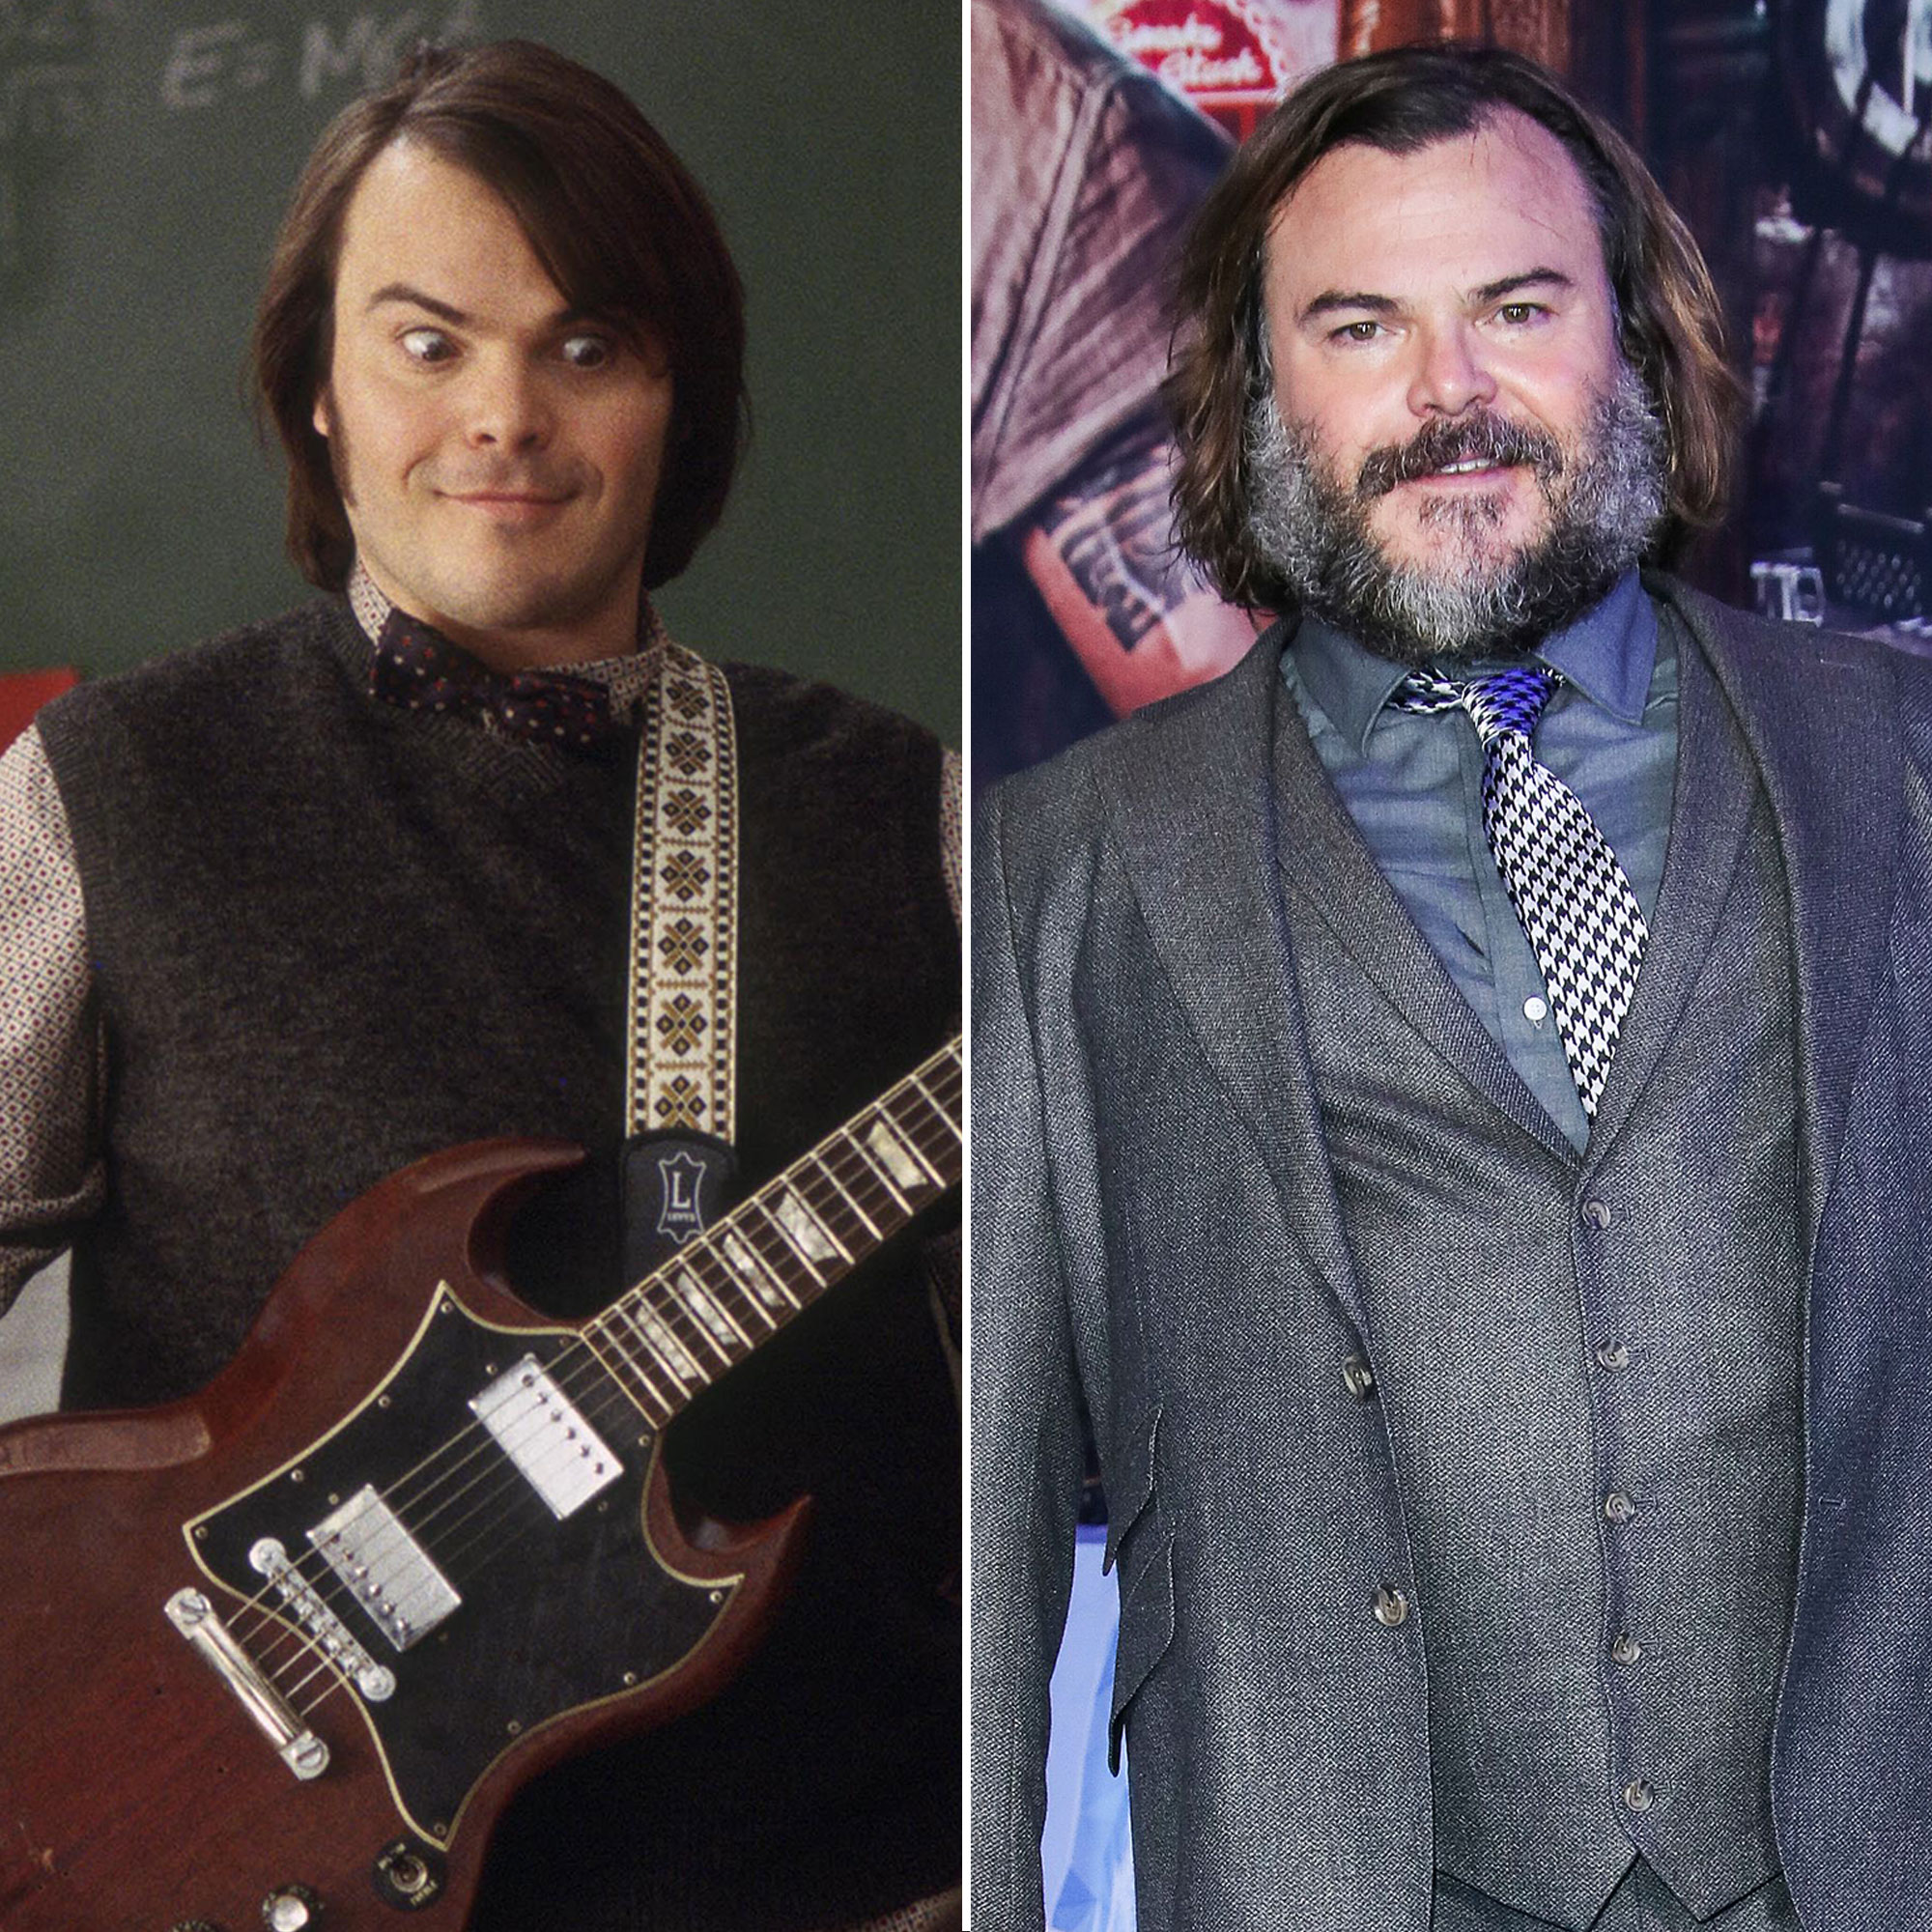 Jack Black fans are just finding out Jack Black isn't his original